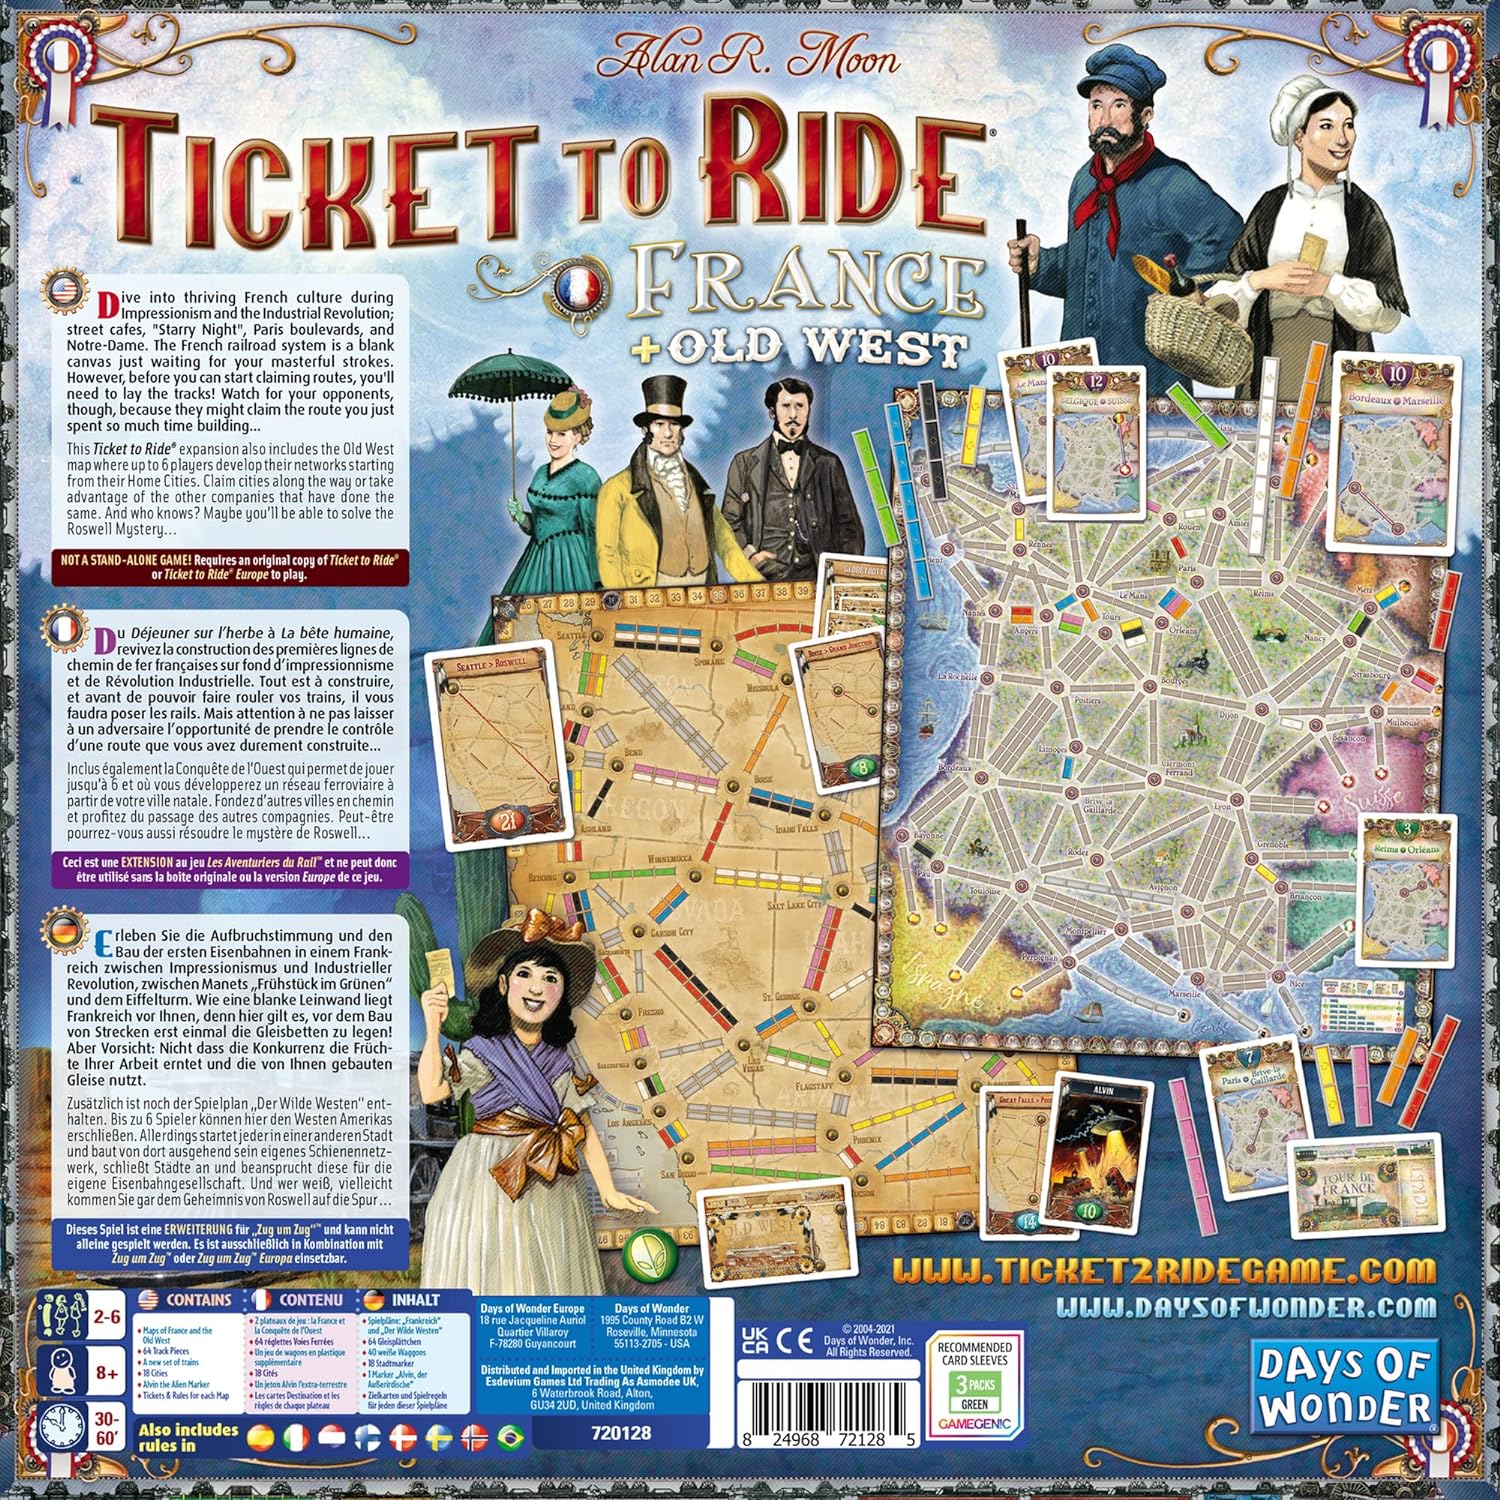 Ticket to Ride France board game tabletop game